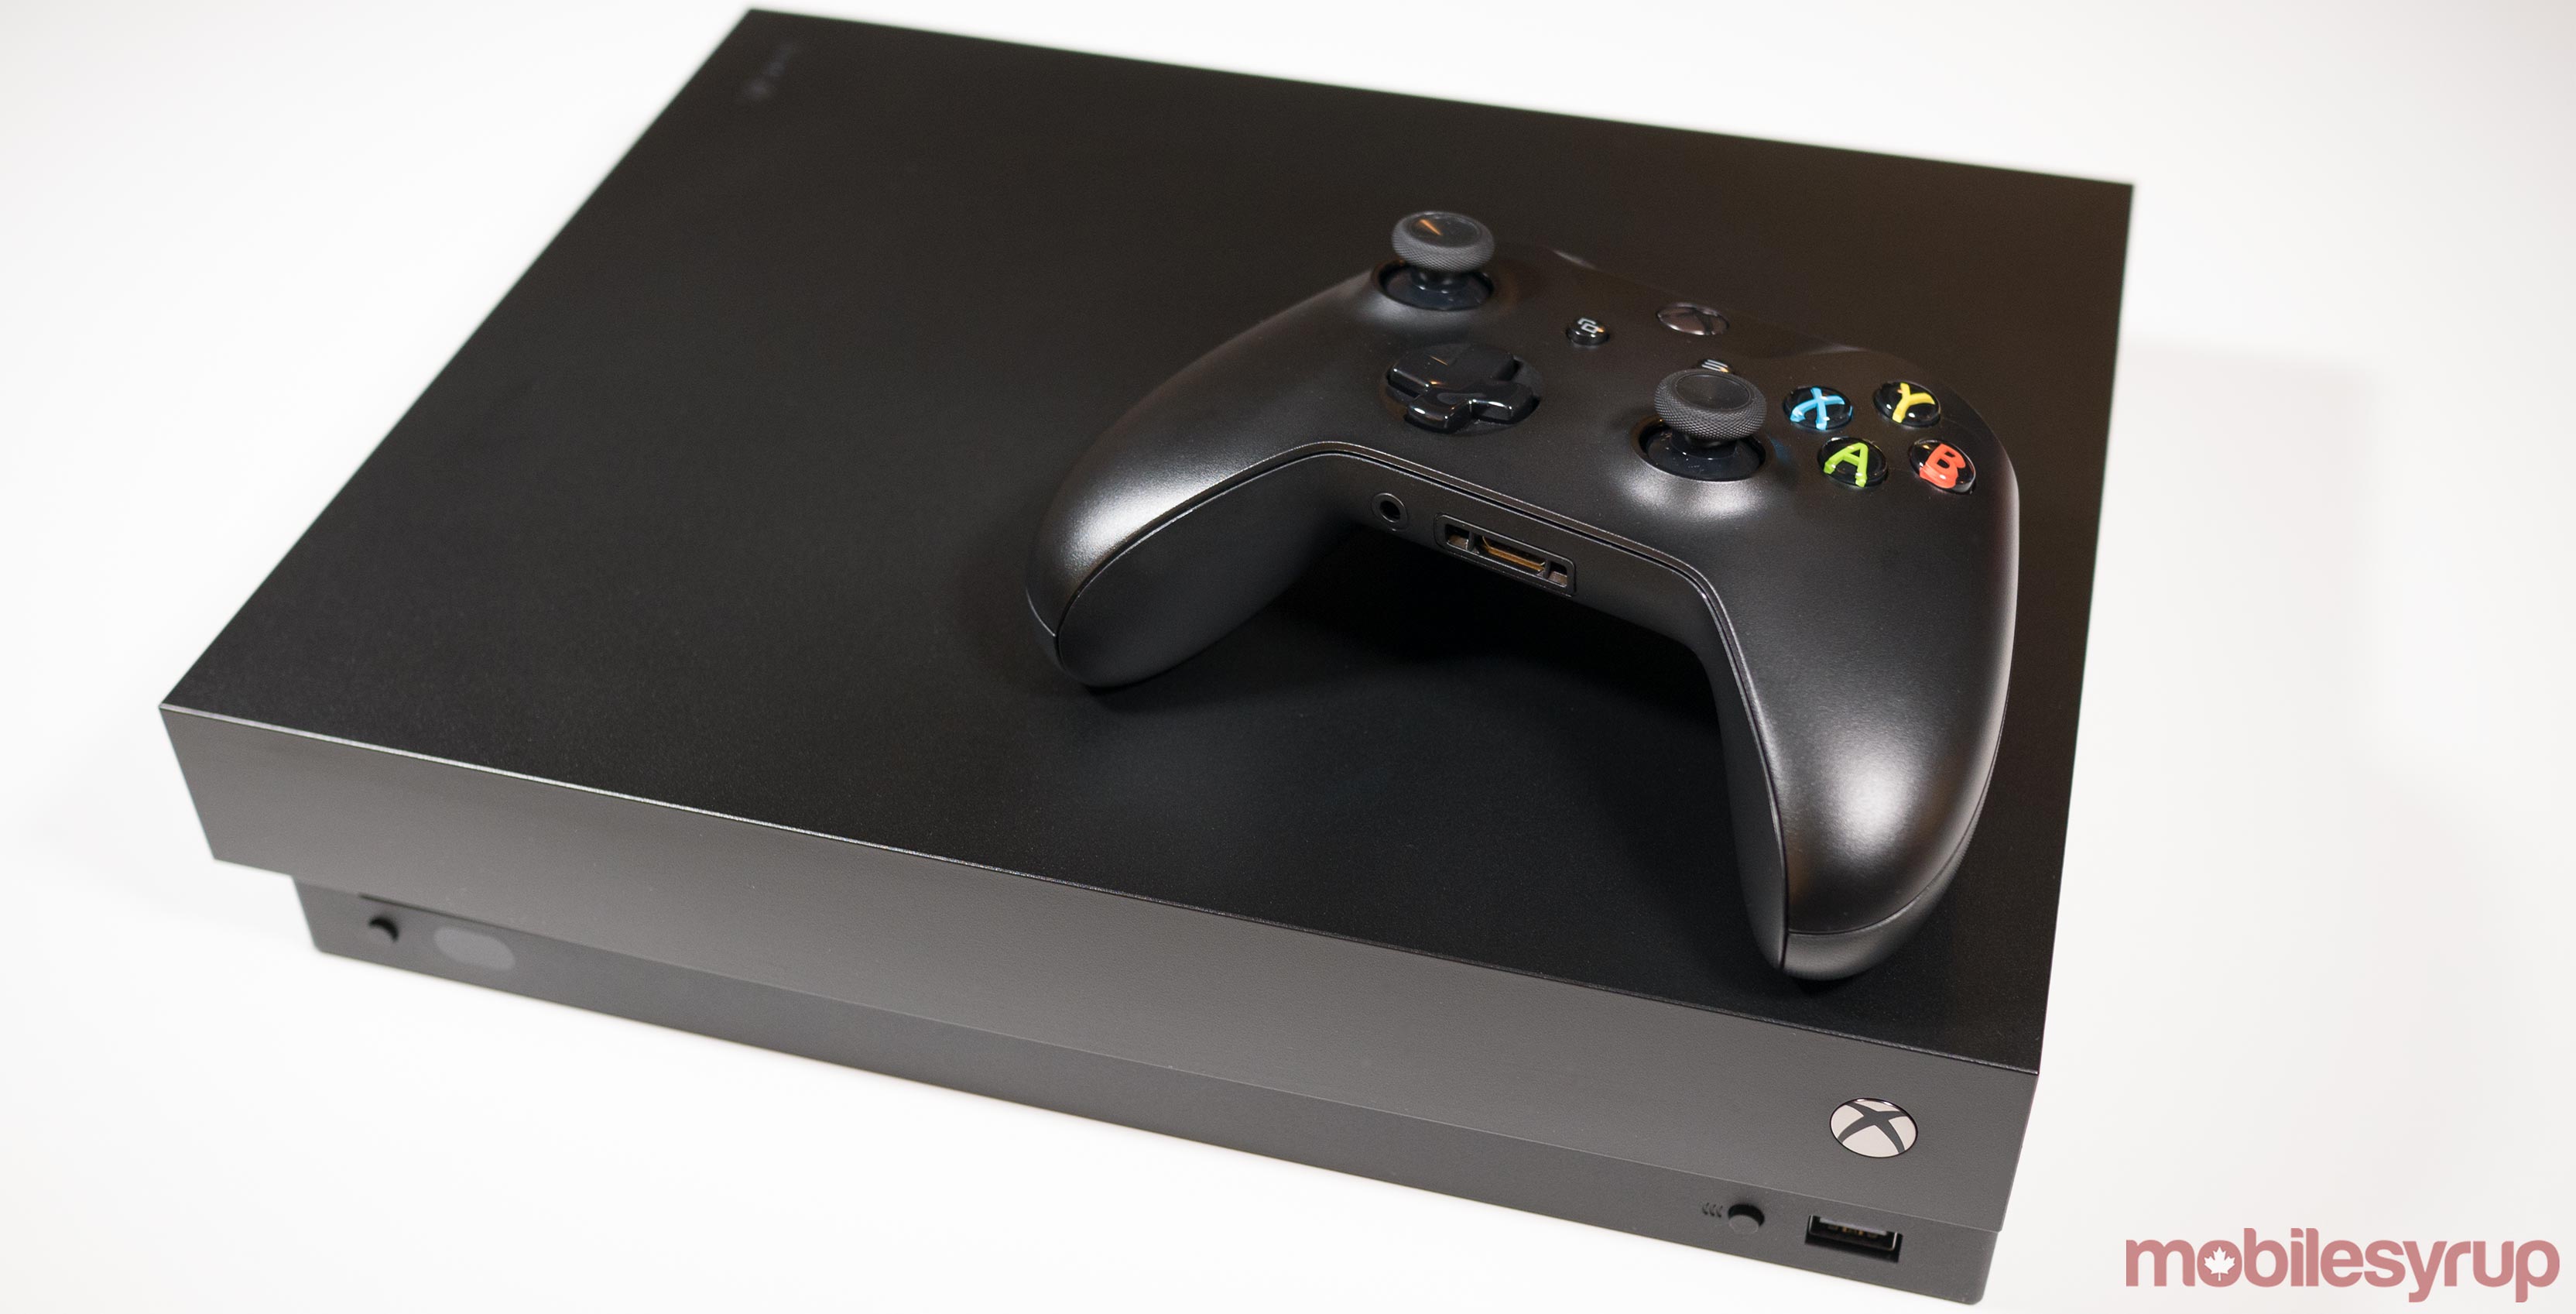 Xbox One X with controller